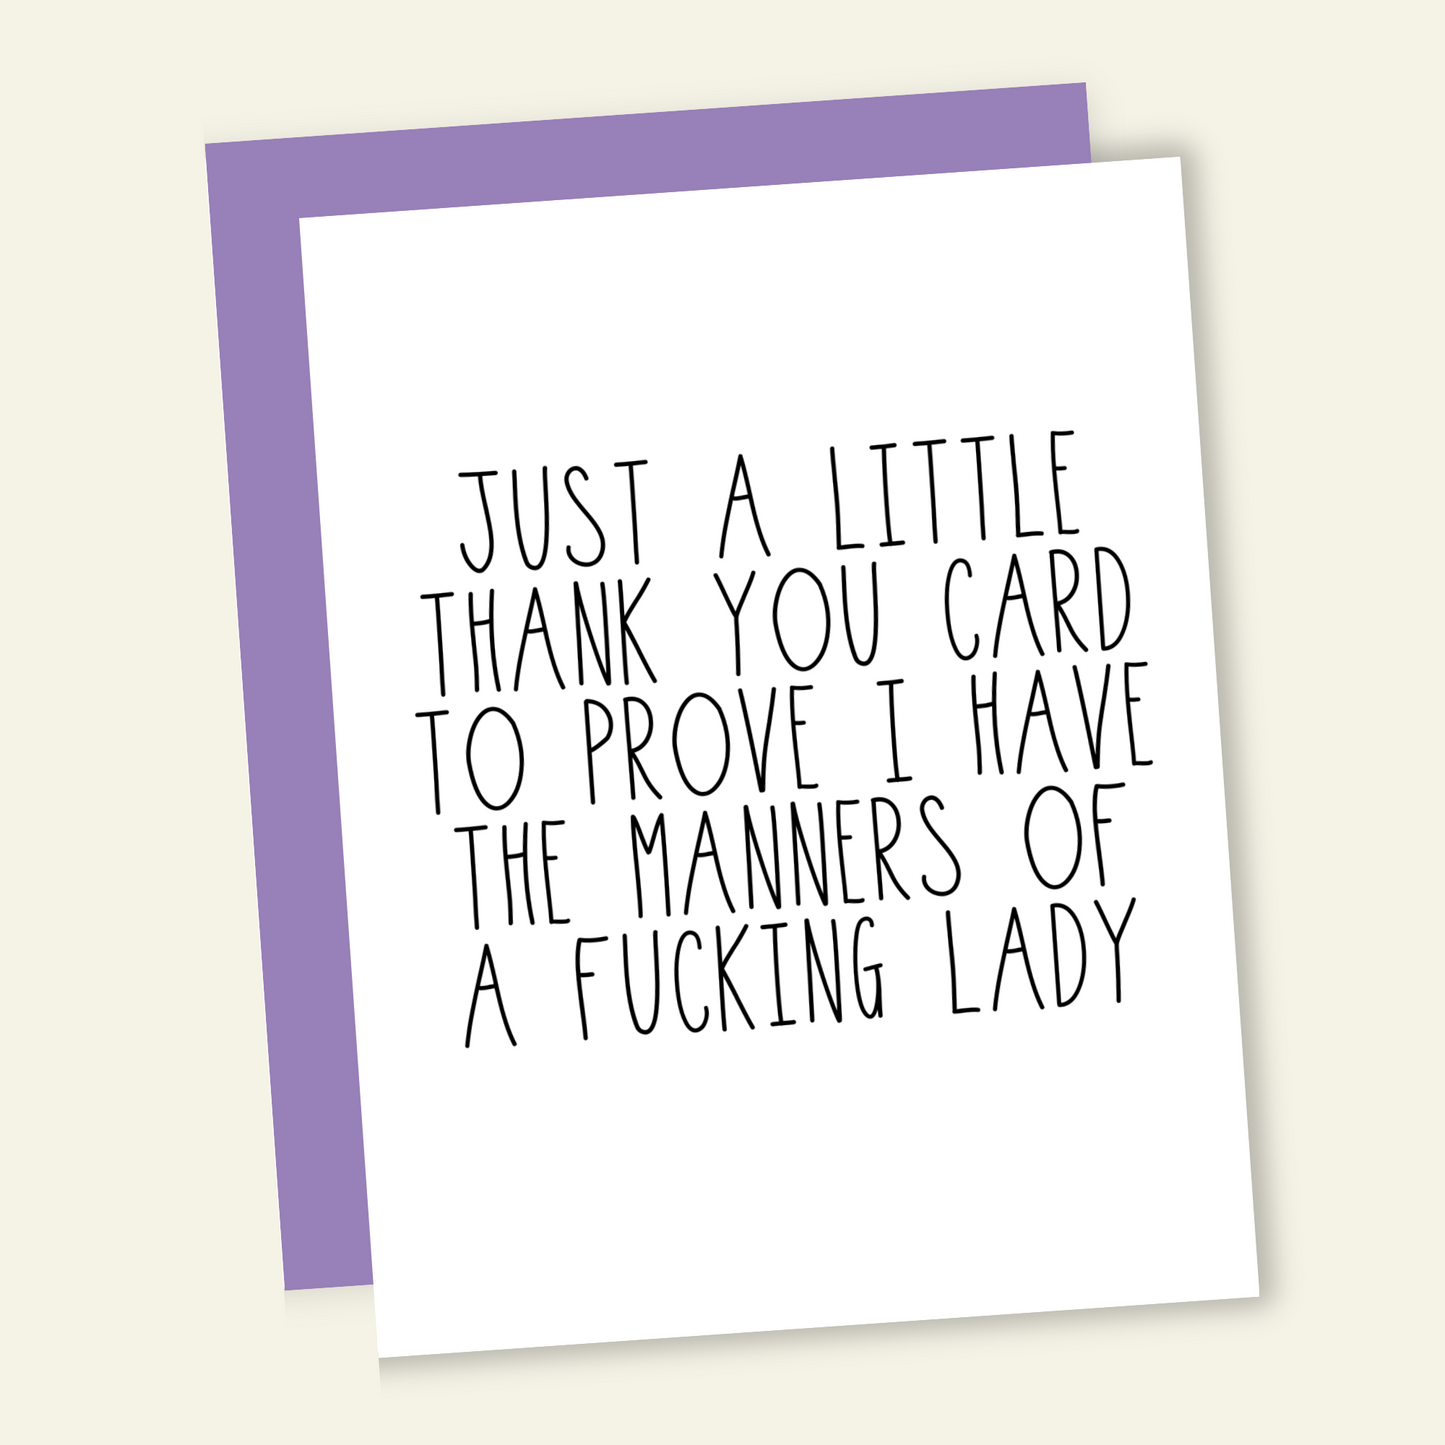 A Thank You Card to Prove My Manners | Funny Thank You Card